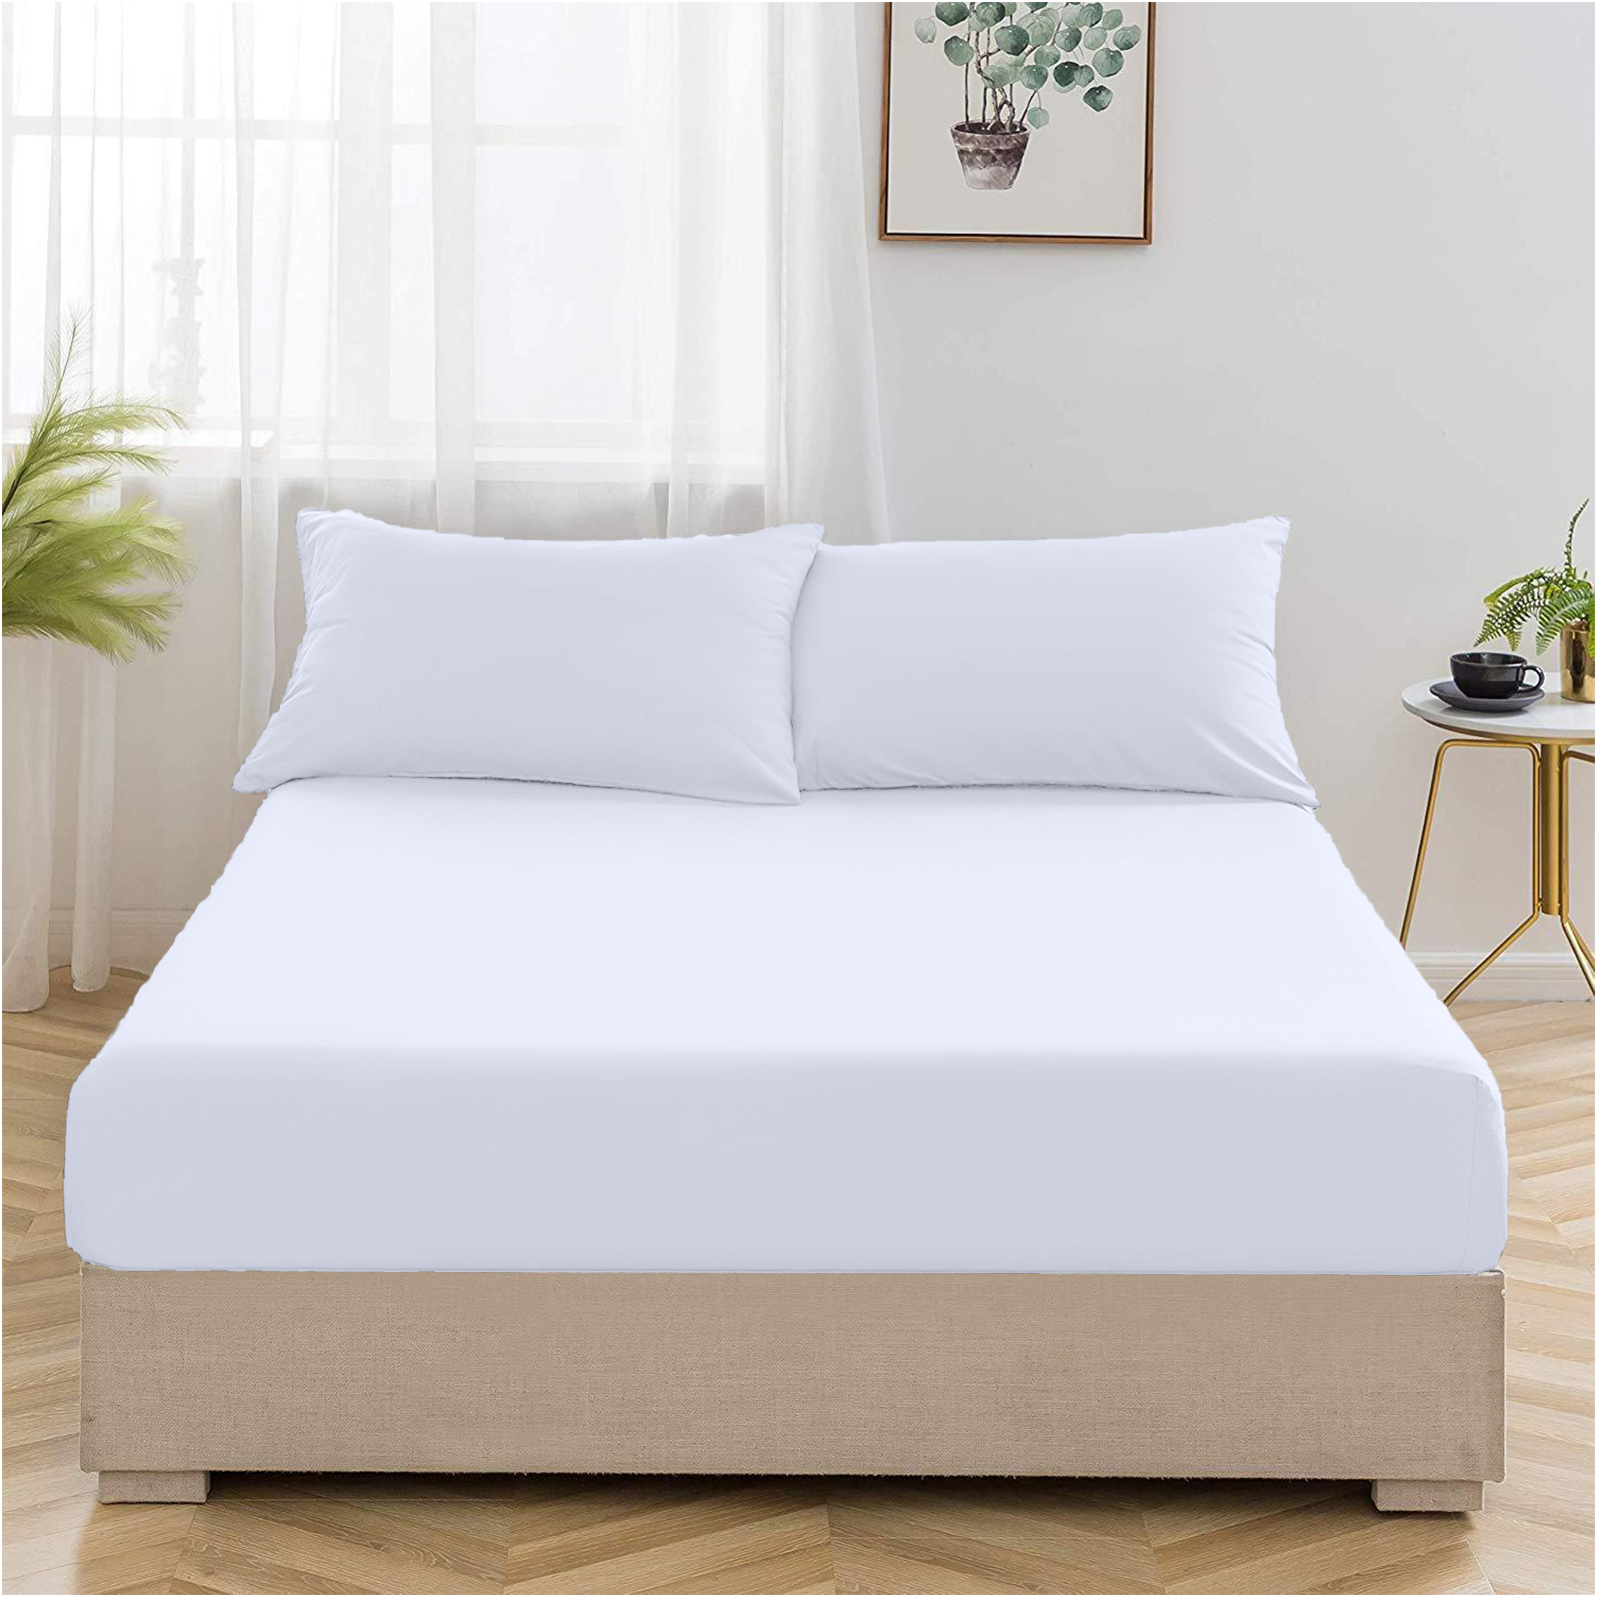 Super Soft, Breathable Moss Bed Sheets – The Sky Bedding